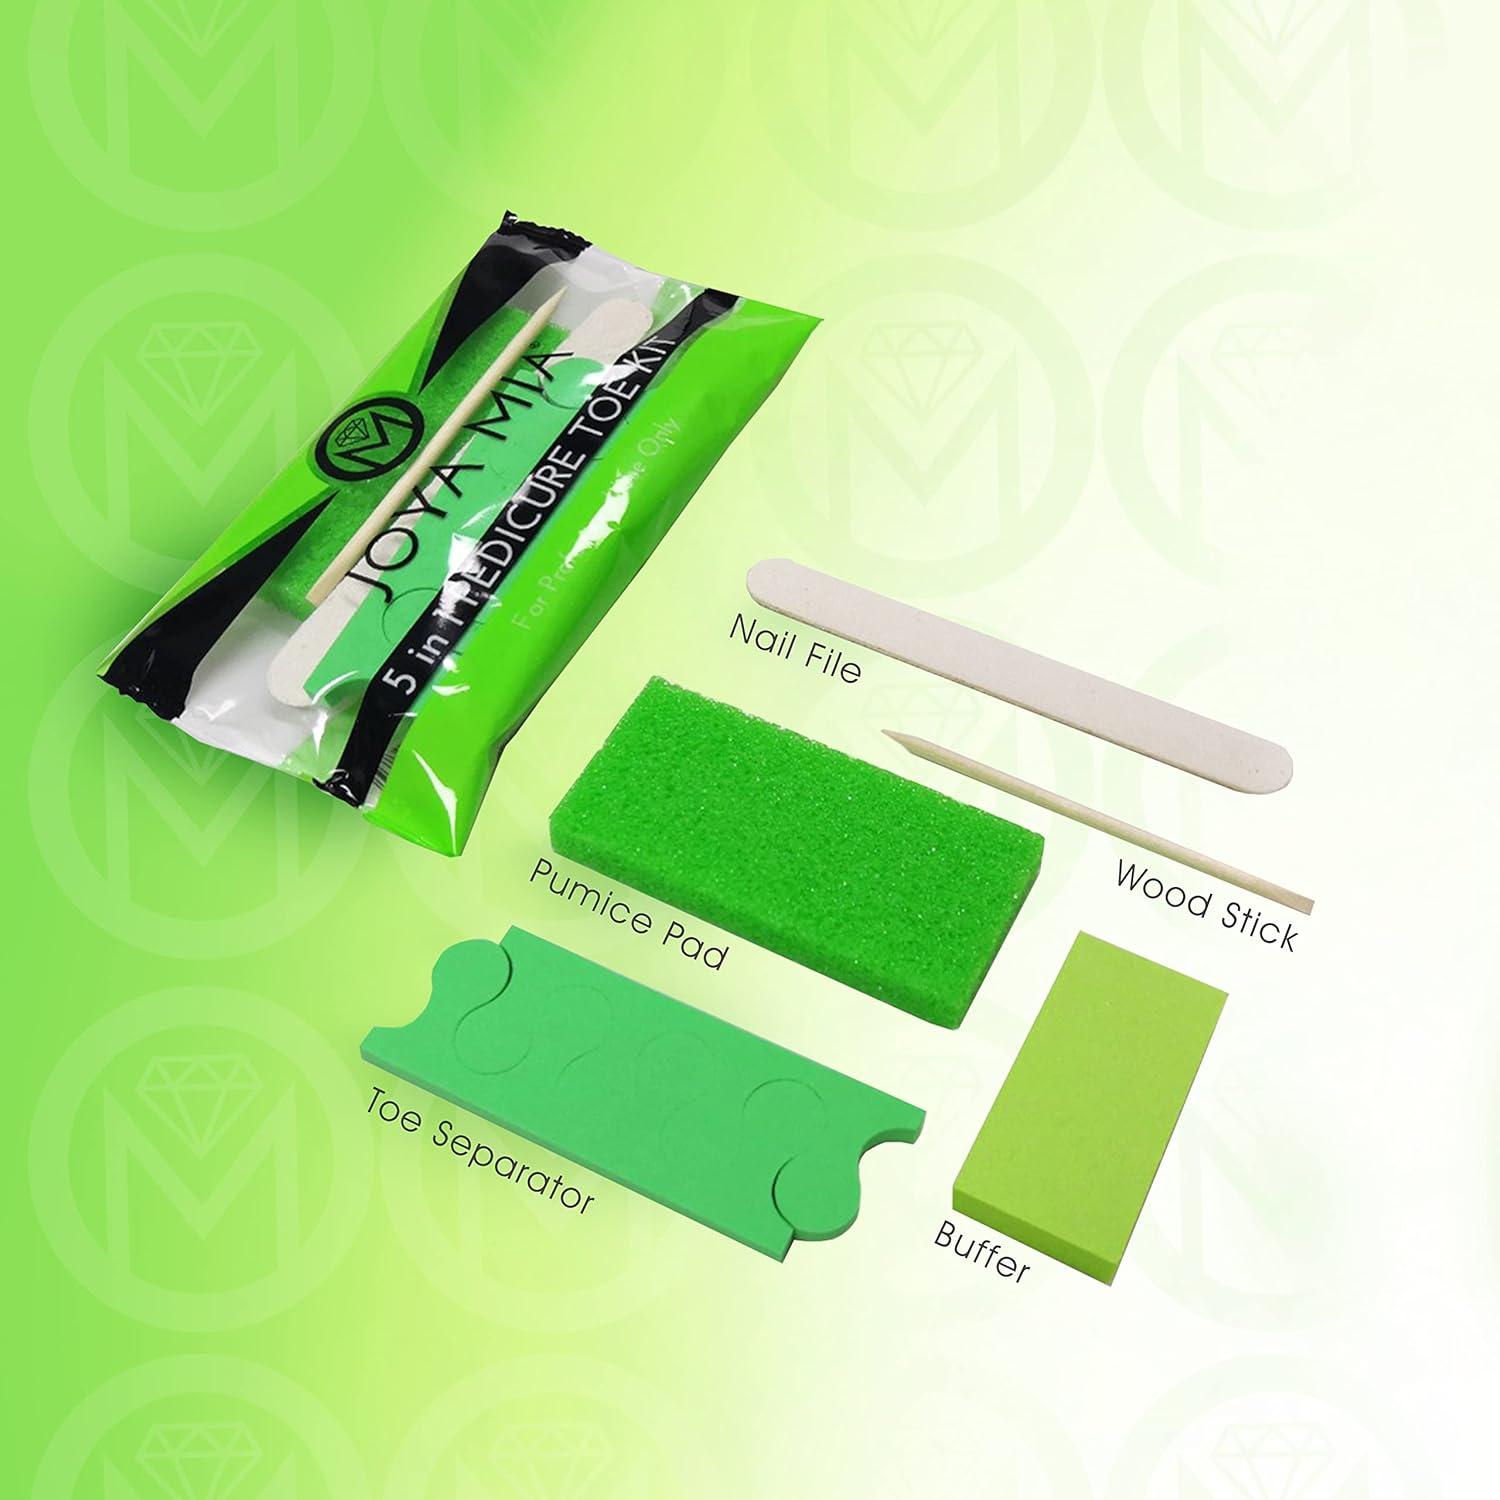 Disposable Pedicure Kit 5in1 by Joya Mia Including: Pumice Pad Nail File  100/180 Green Mini Buffer 100/180 Wood Stick Green Toe Separator  Individually Packed 200 Count in Box (5in1 200.00) 5in1 200.0